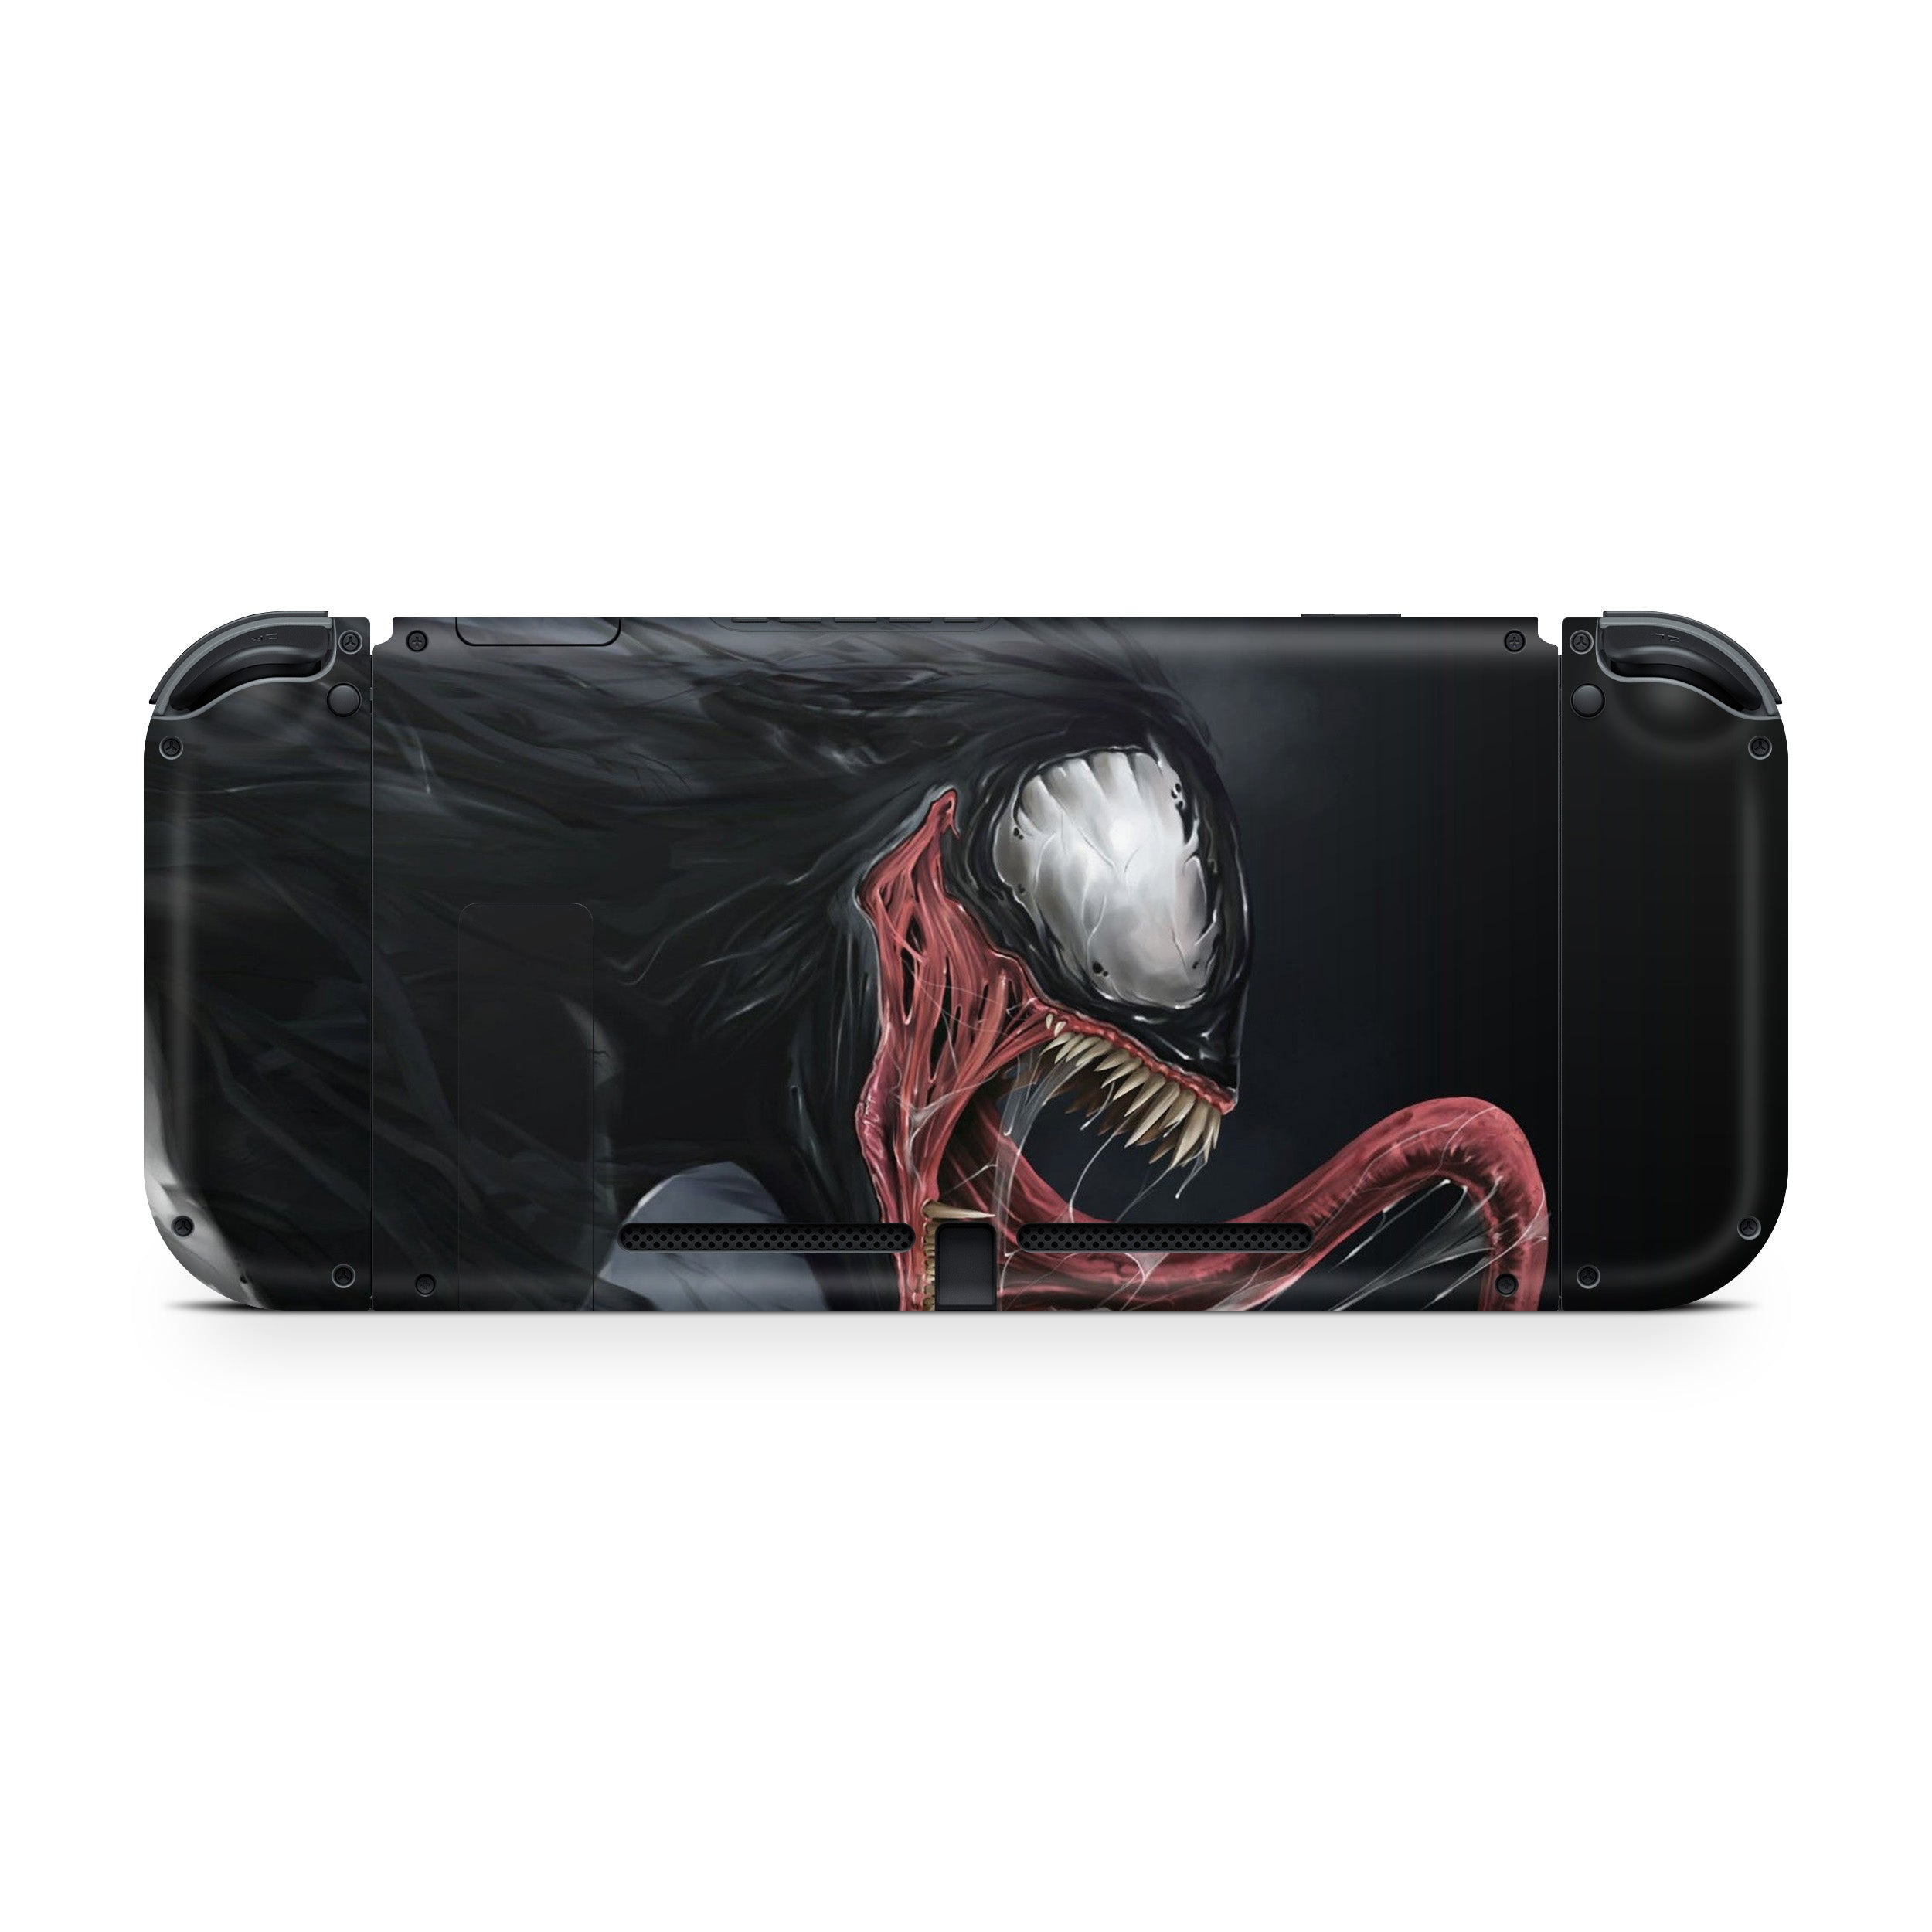 A video game skin featuring a Marvel Venom design for the Nintendo Switch.